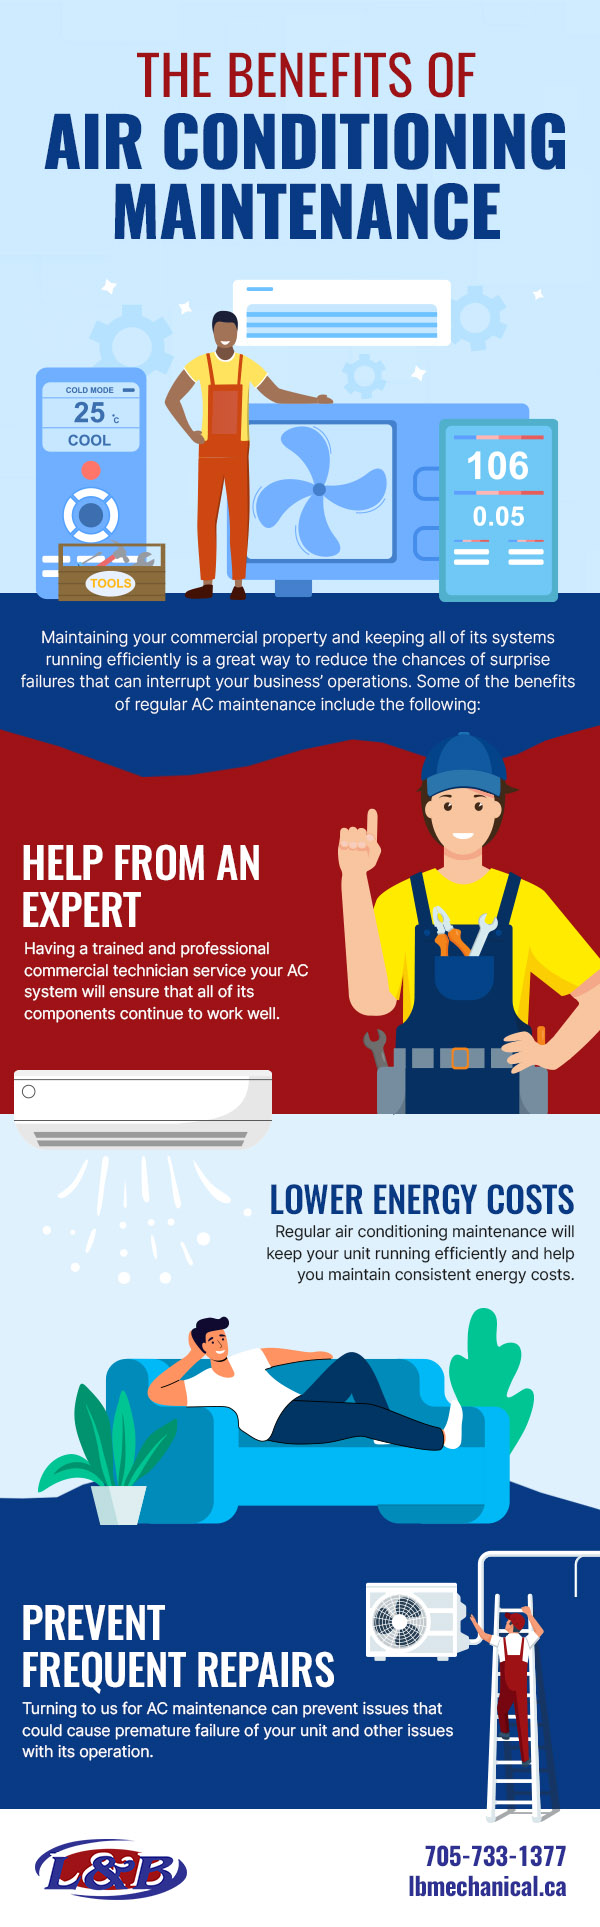 Keep Your Essential Services Running Efficiently with Air Conditioning Maintenance 